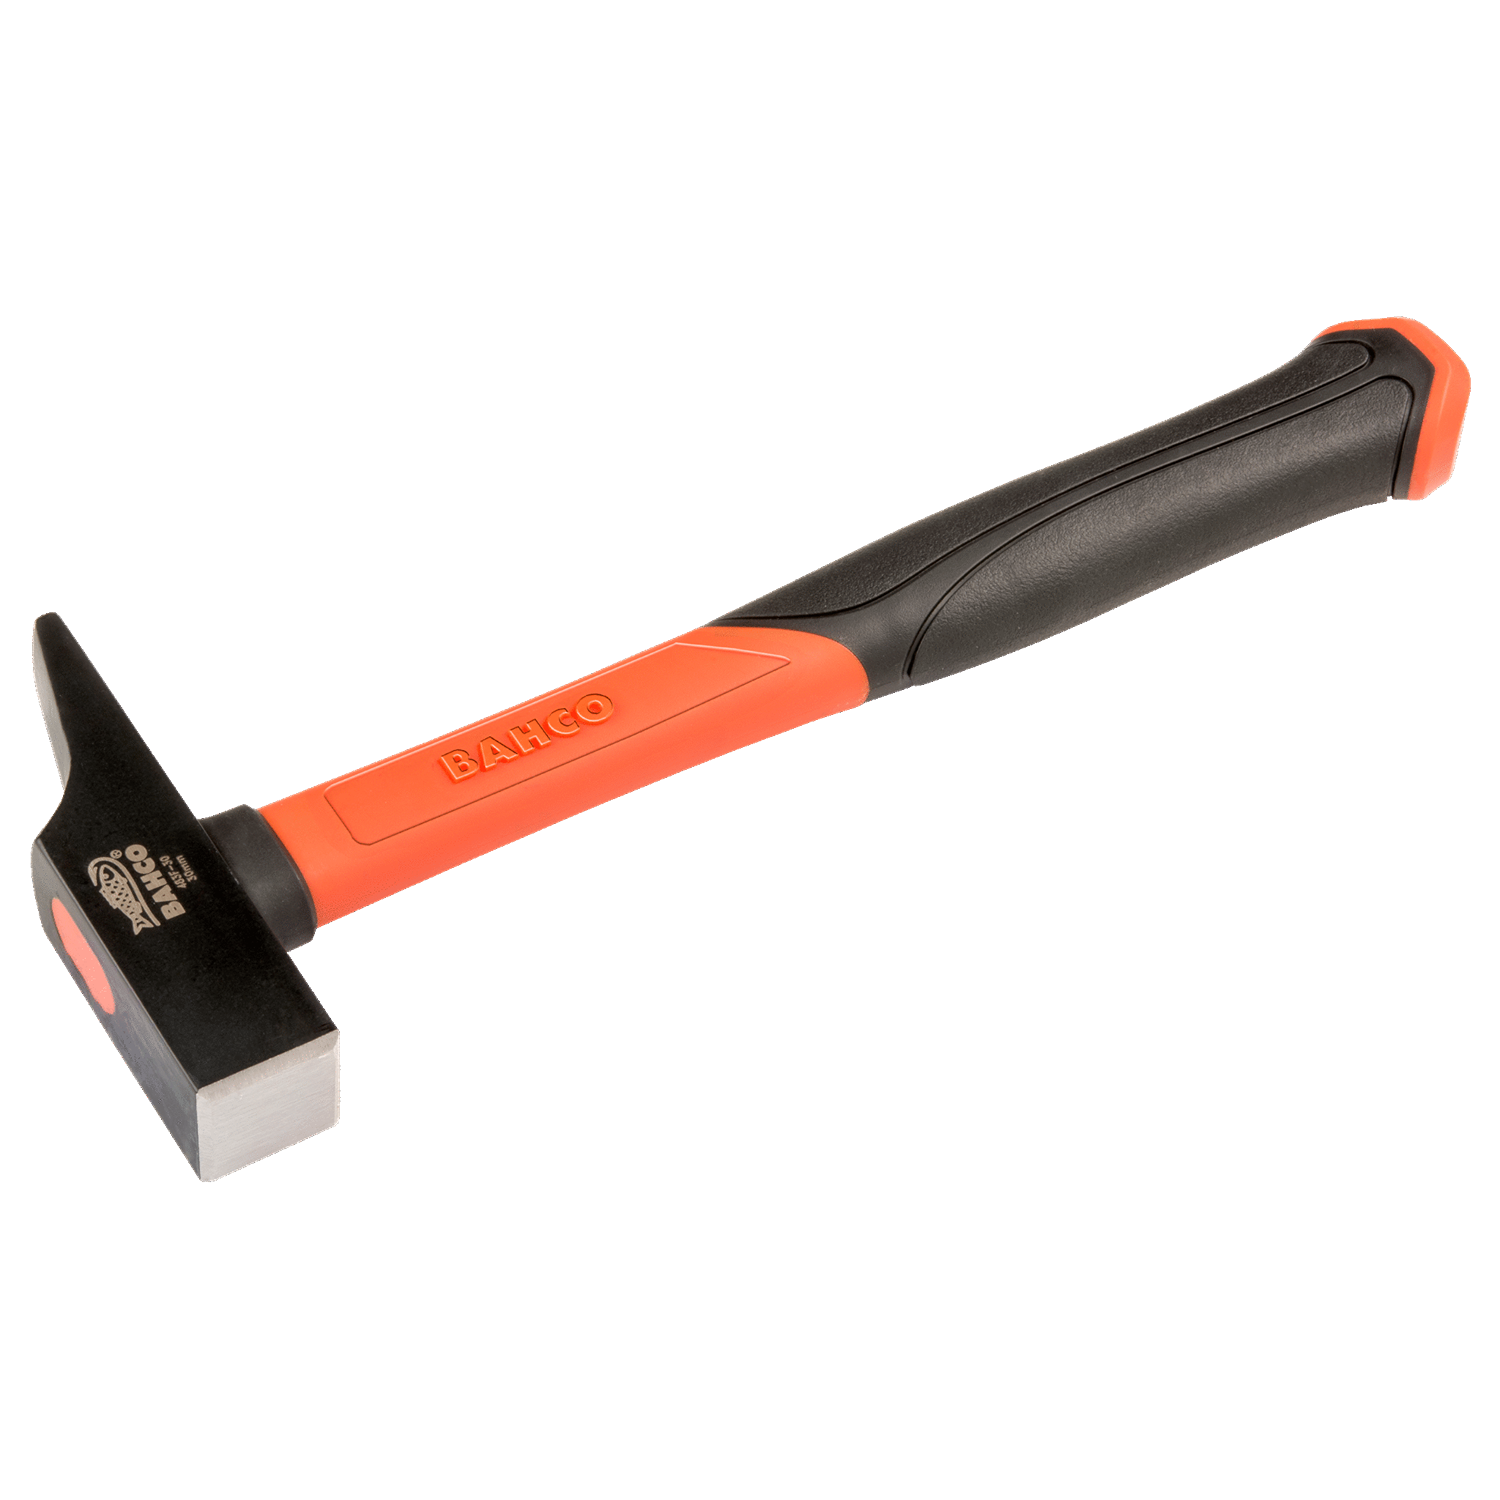 BAHCO 483F Joiner Hammer Fiberglass Handle (BAHCO Tools) - Premium Joiner Hammer from BAHCO - Shop now at Yew Aik.